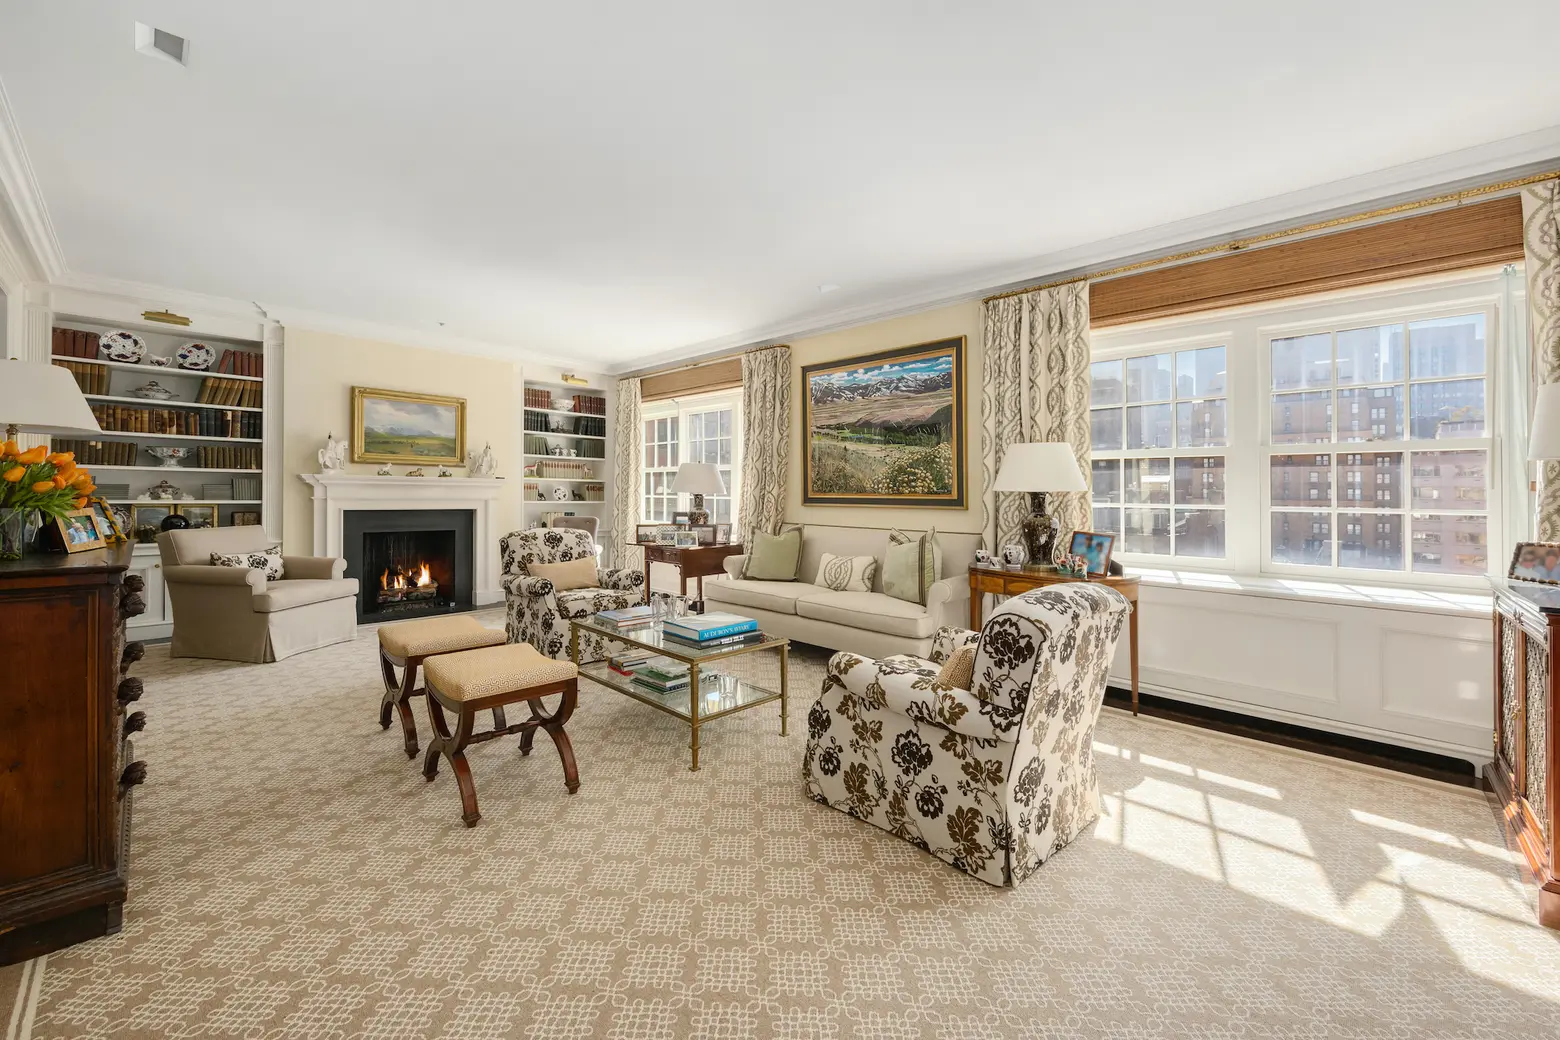 This $6.8M Upper East Side duplex has 3,000 square feet of living space and a huge terrace